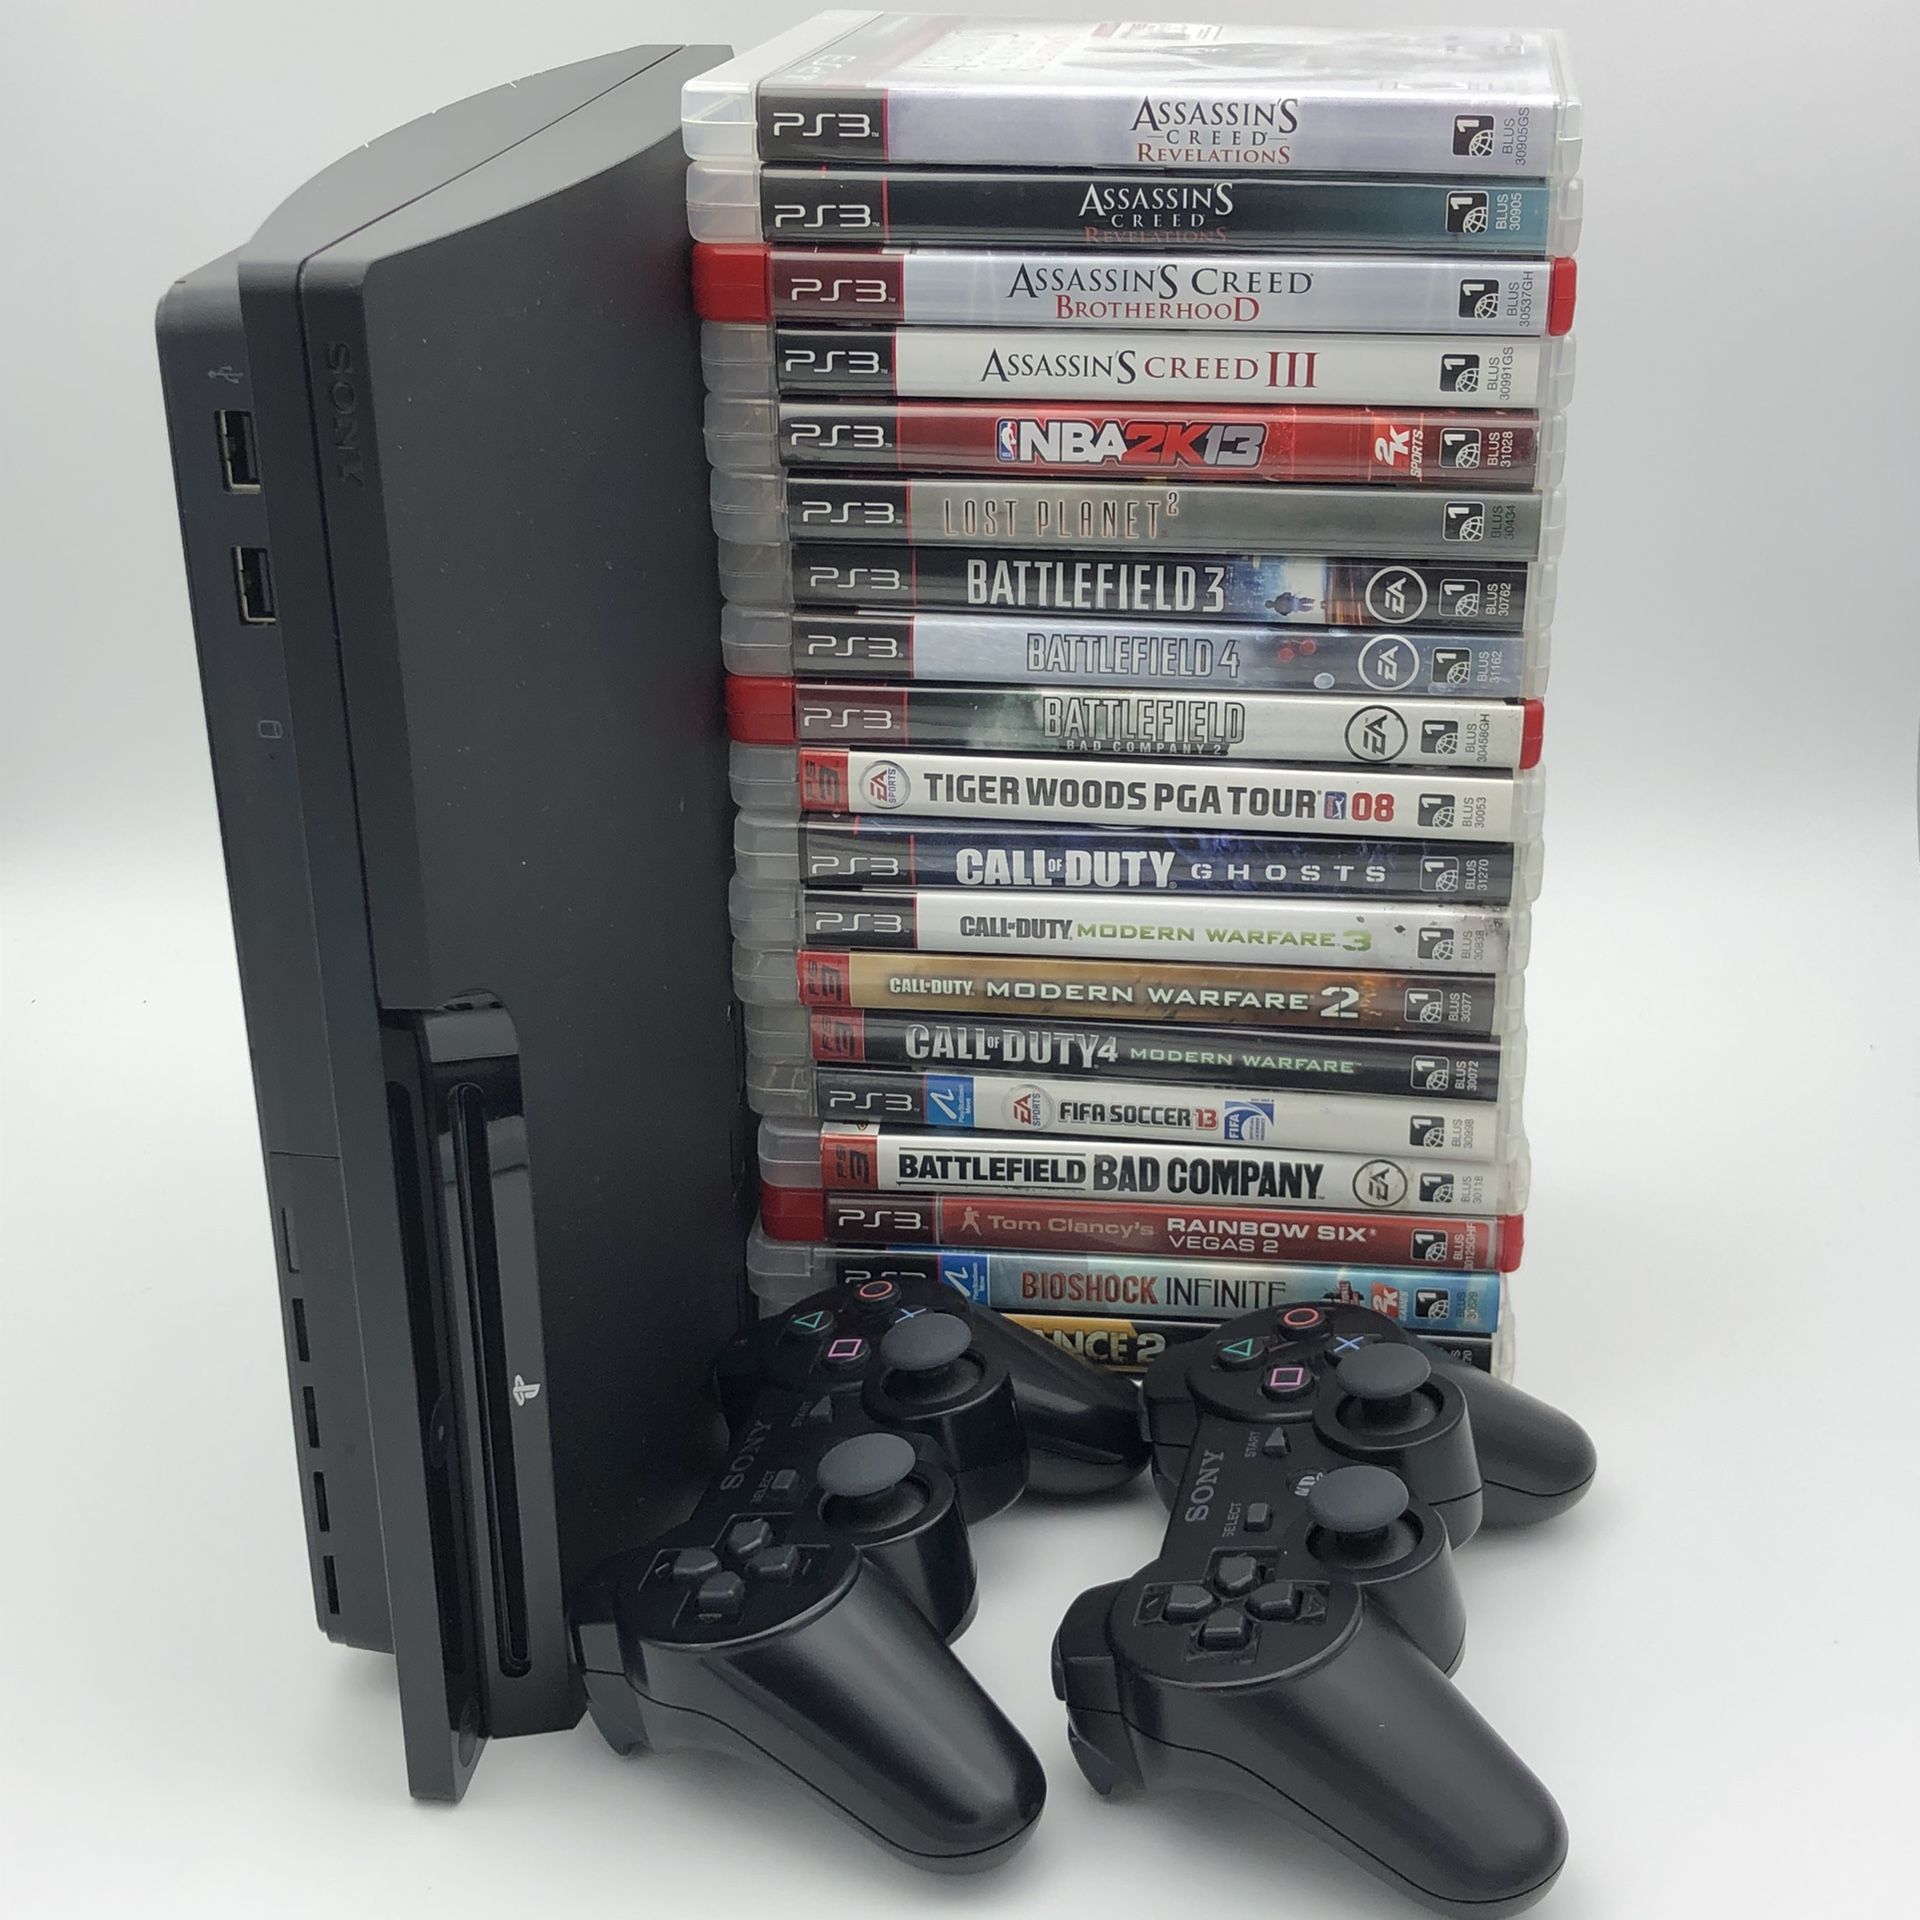 Sony PS3 Console w/ 20 Games - All Tested